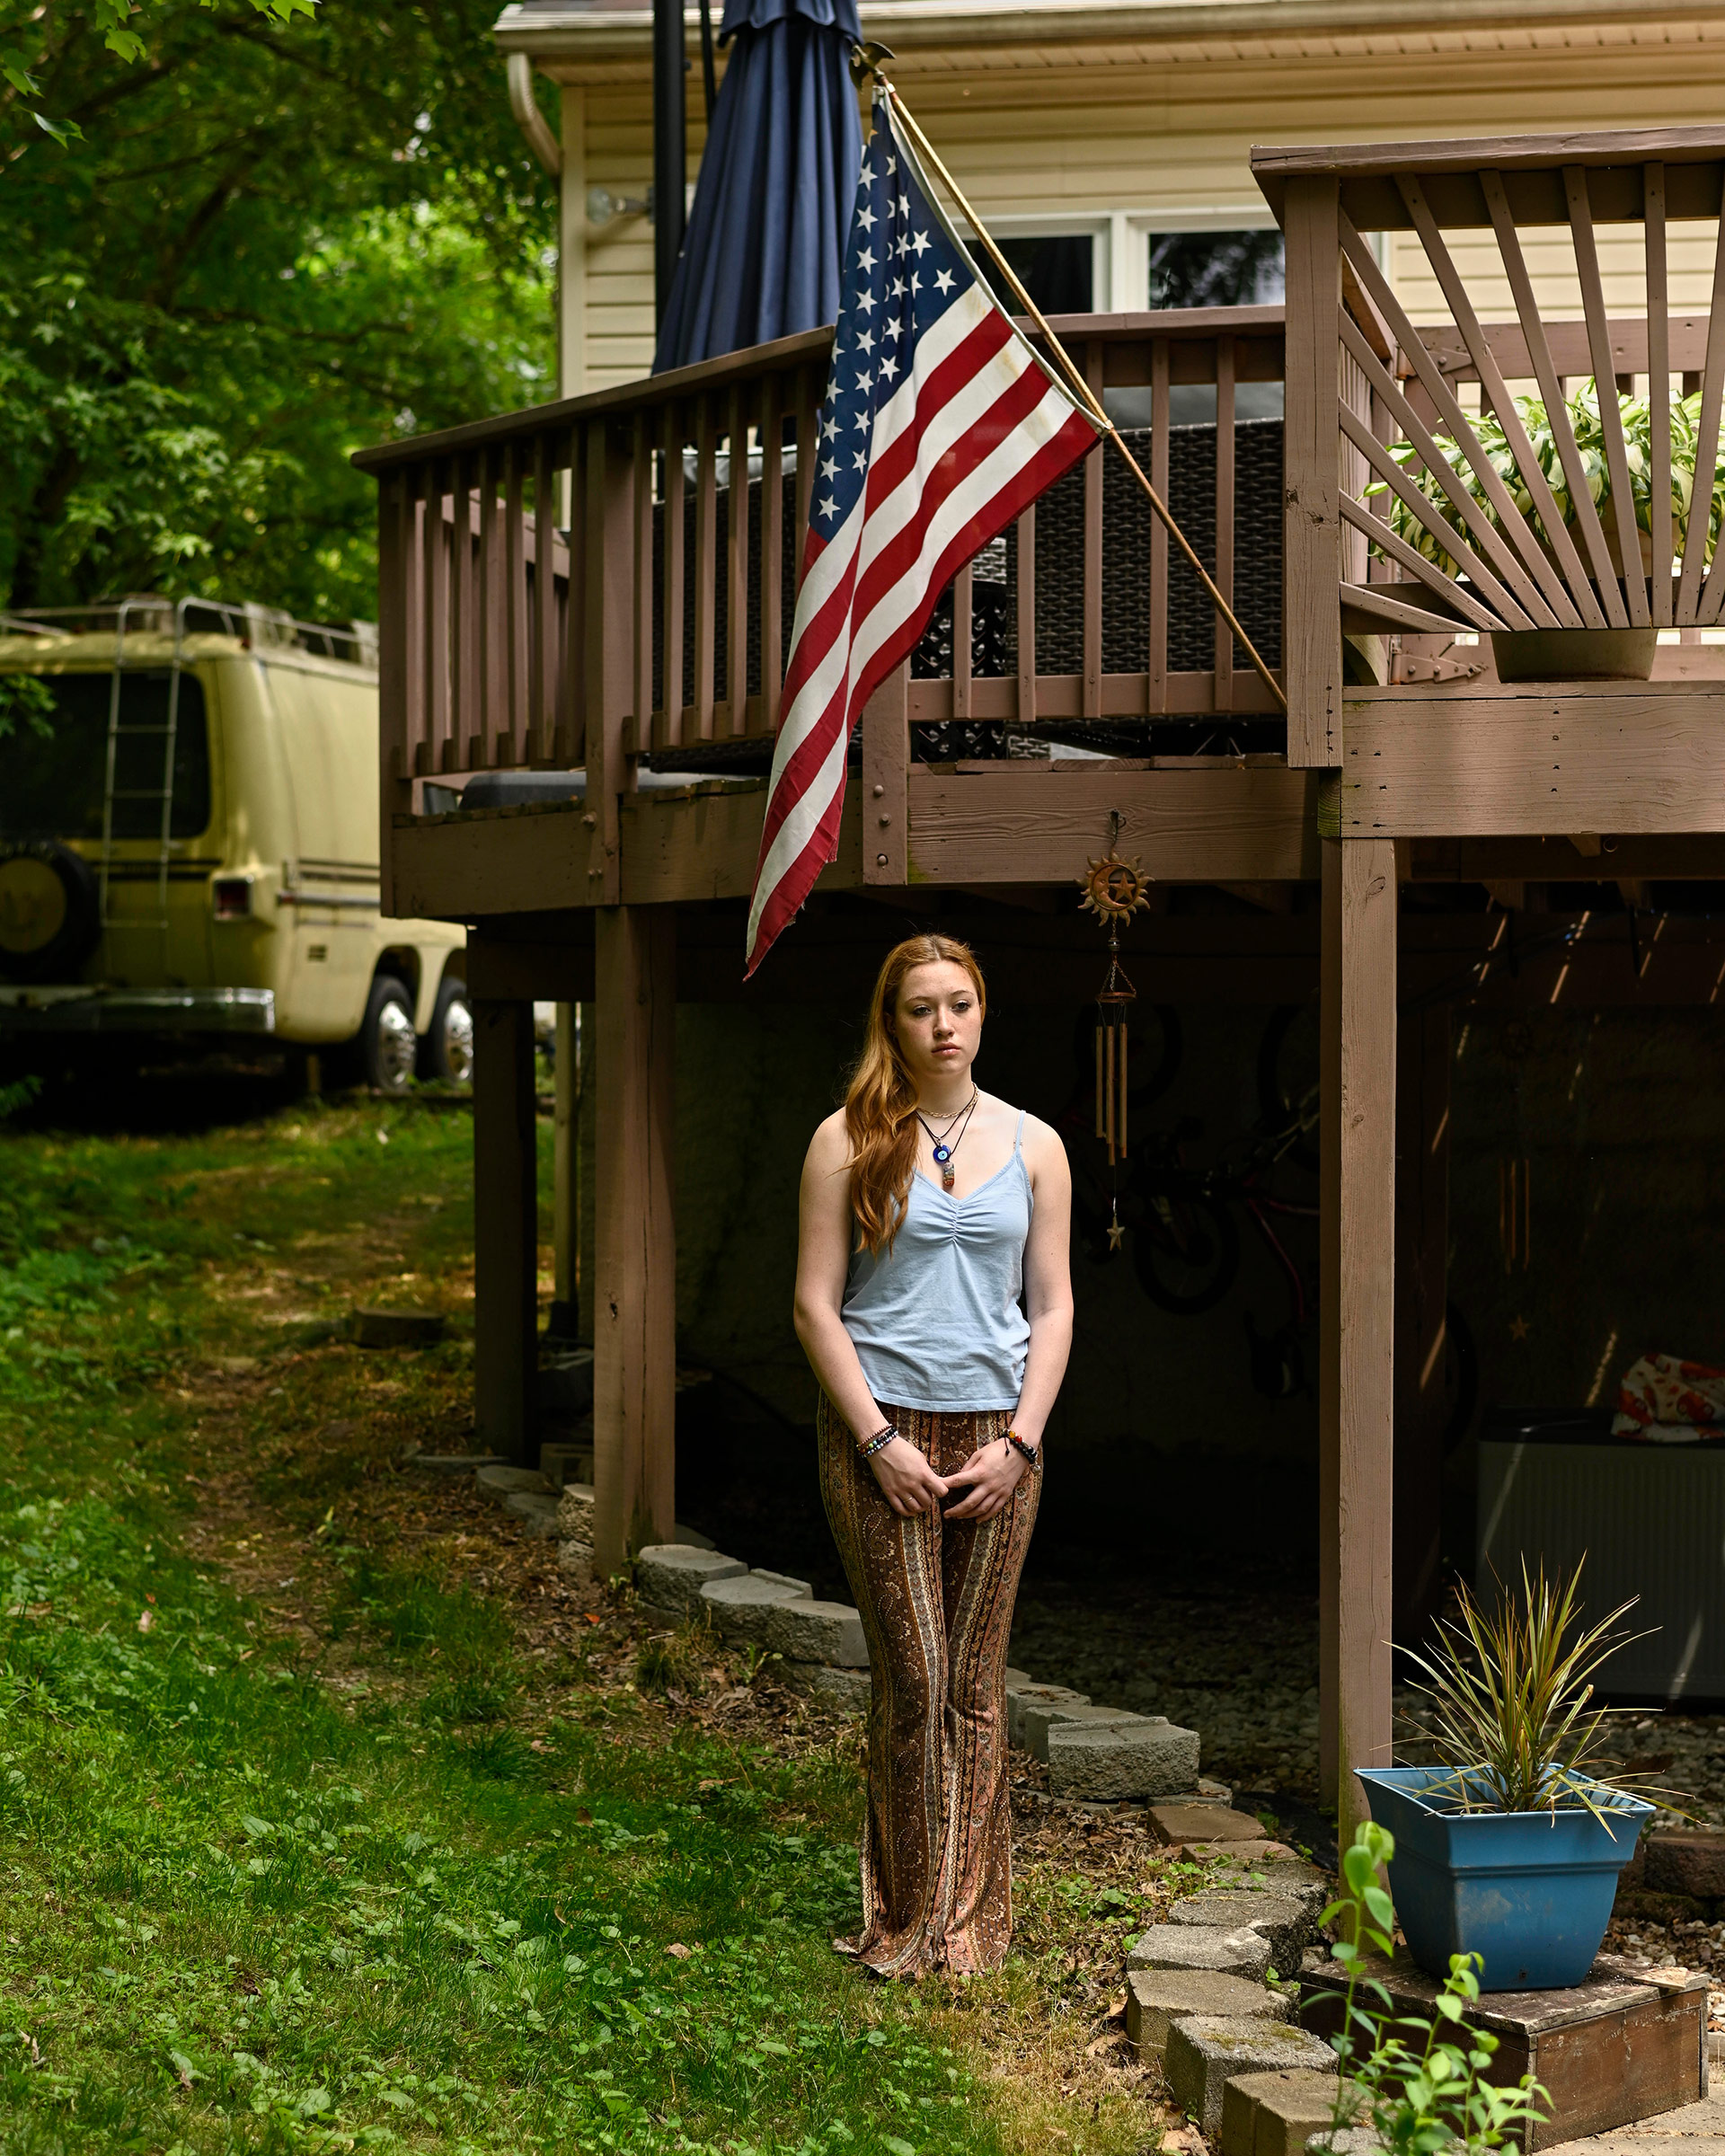 Kayleigh, 17, in Maryland.